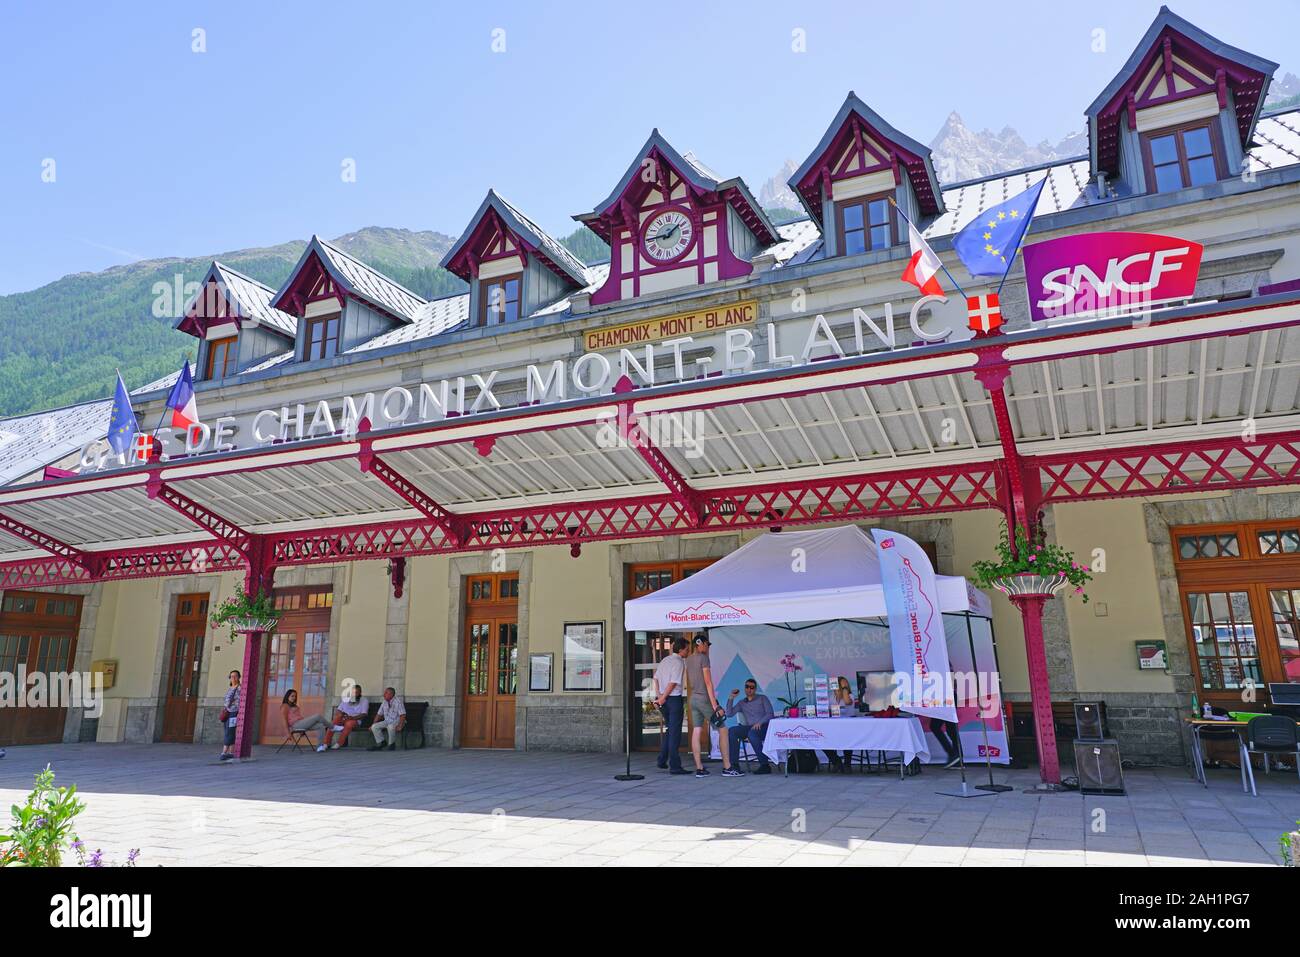 CHAMONIX, FRANCE -26 JUN 2019- View of a red SNCF Ter train at the Gare de Chamonix Mont-Blanc railway station in summer in France near Switzerland an Stock Photo